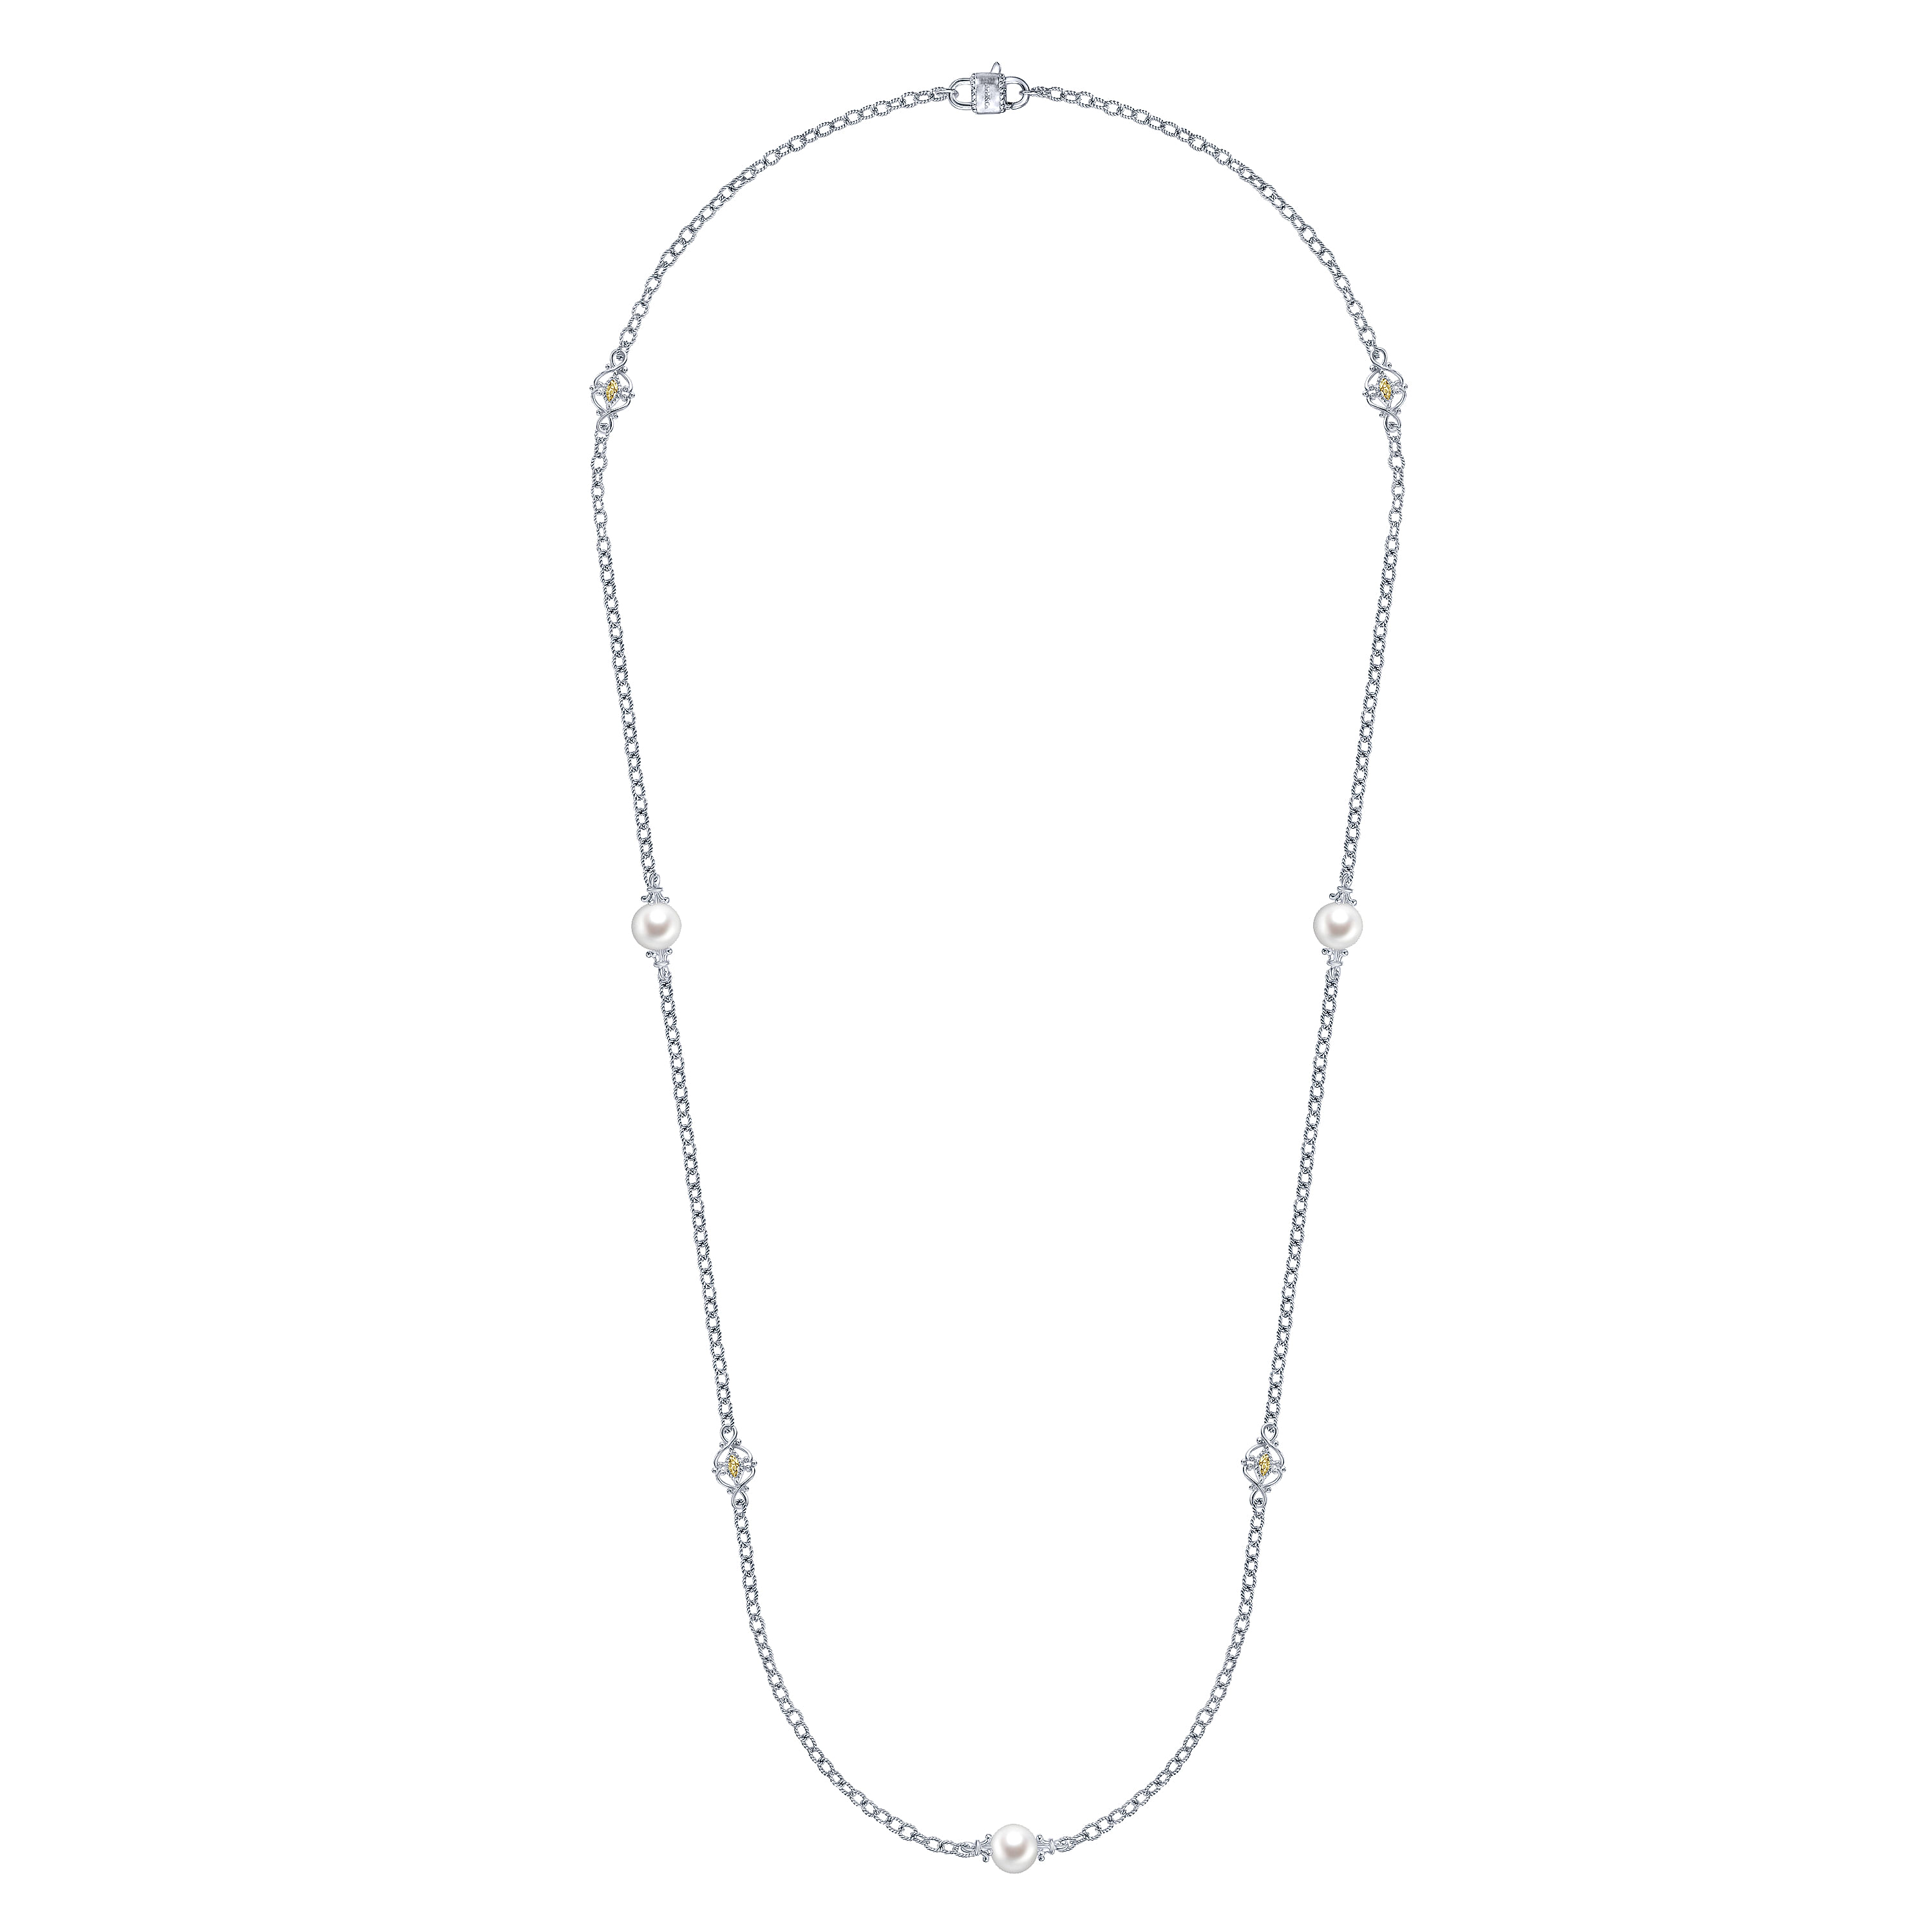 24 inch 925 Sterling Silver and 18K Yellow Gold Cultured Pearl and Filigree Station Necklace - Shot 2